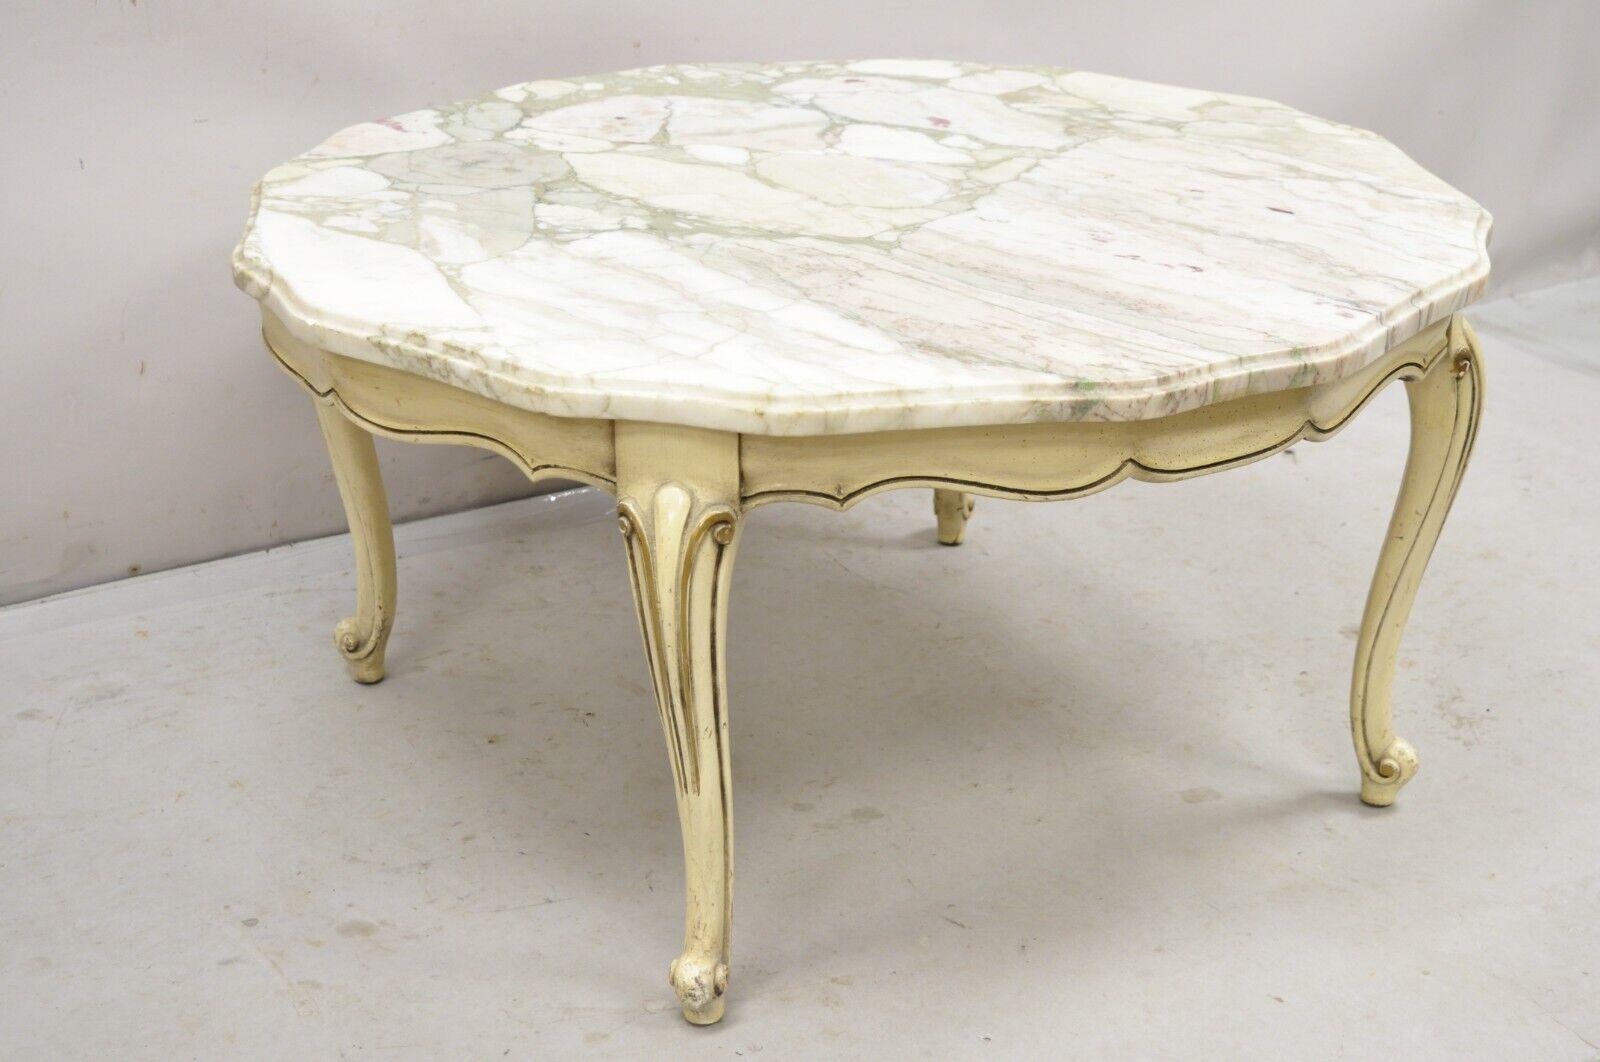 Vintage French Provincial Style Shaped Marble Top Cream Painted Round Coffee Table with Gray and Purple Veins. Circa 1960s. Measurements: 18